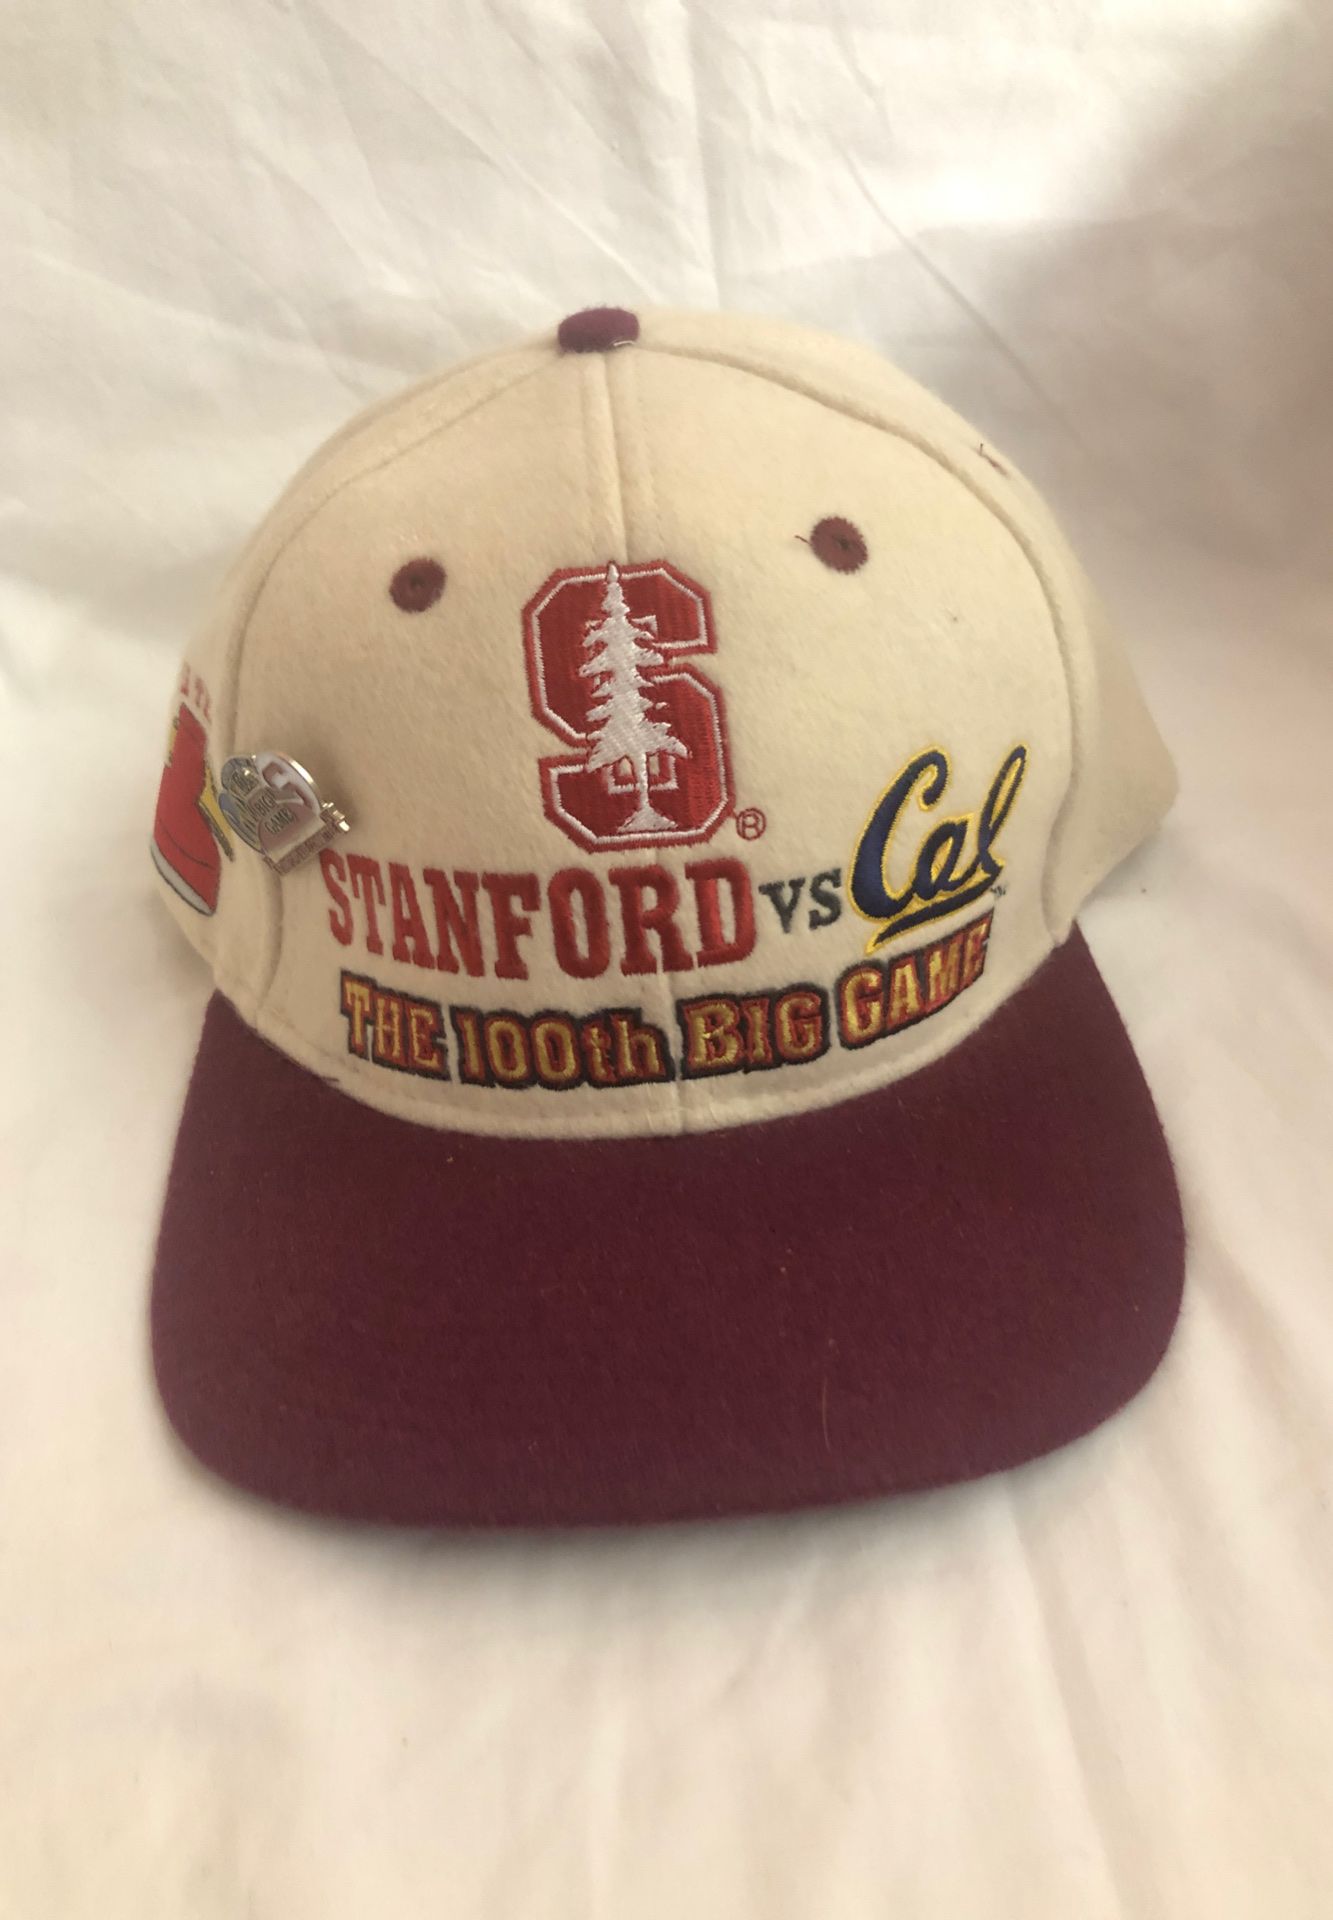 Stanford VS Cal 100th Big Game Wool SnapBack with pin